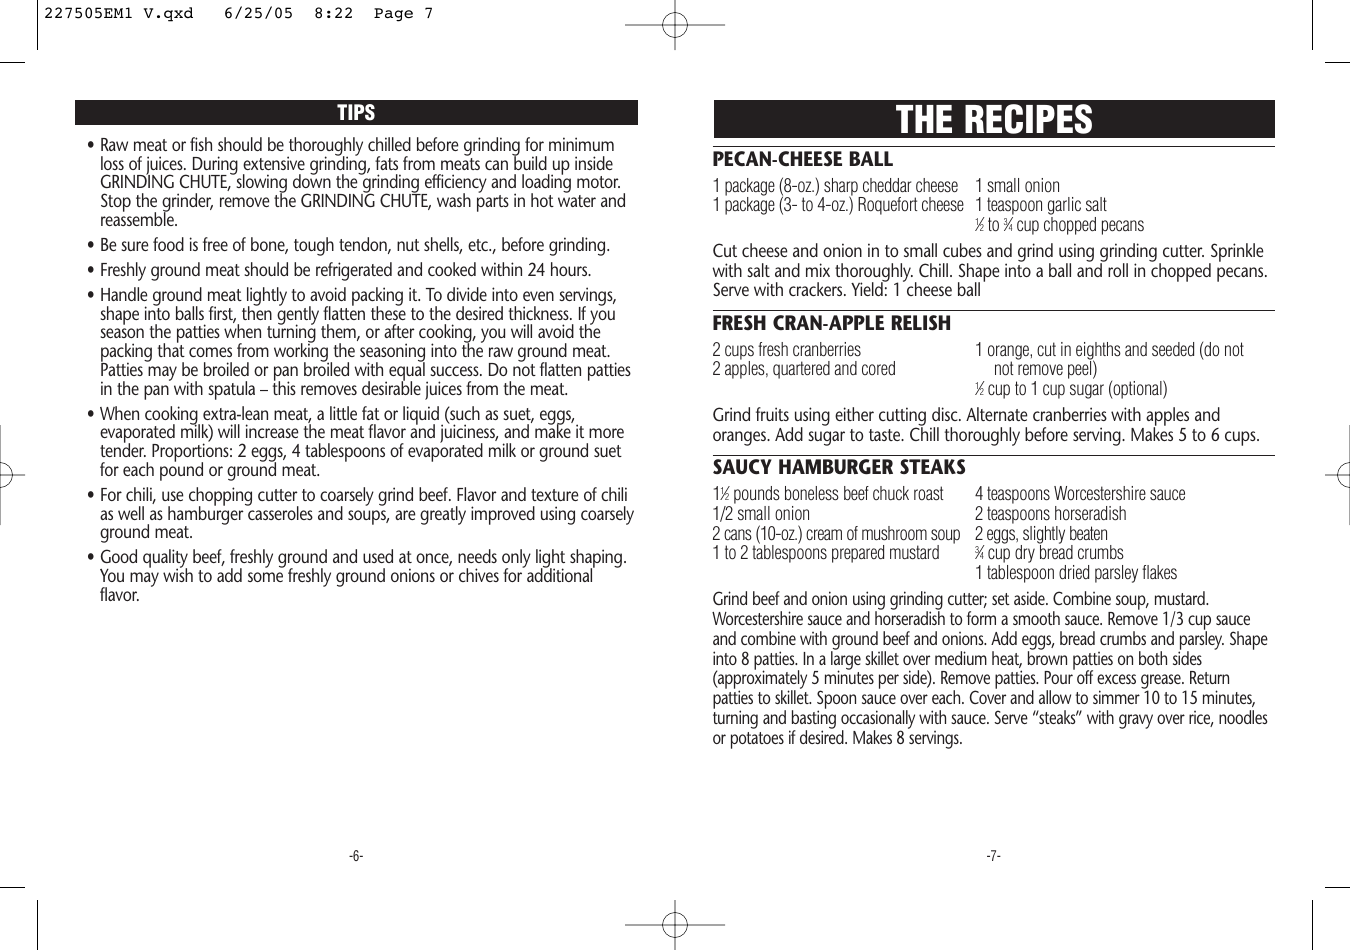 Page 4 of 6 - Rival Rival-Food-Grinder-Users-Manual- 227505EM1 V  Rival-food-grinder-users-manual